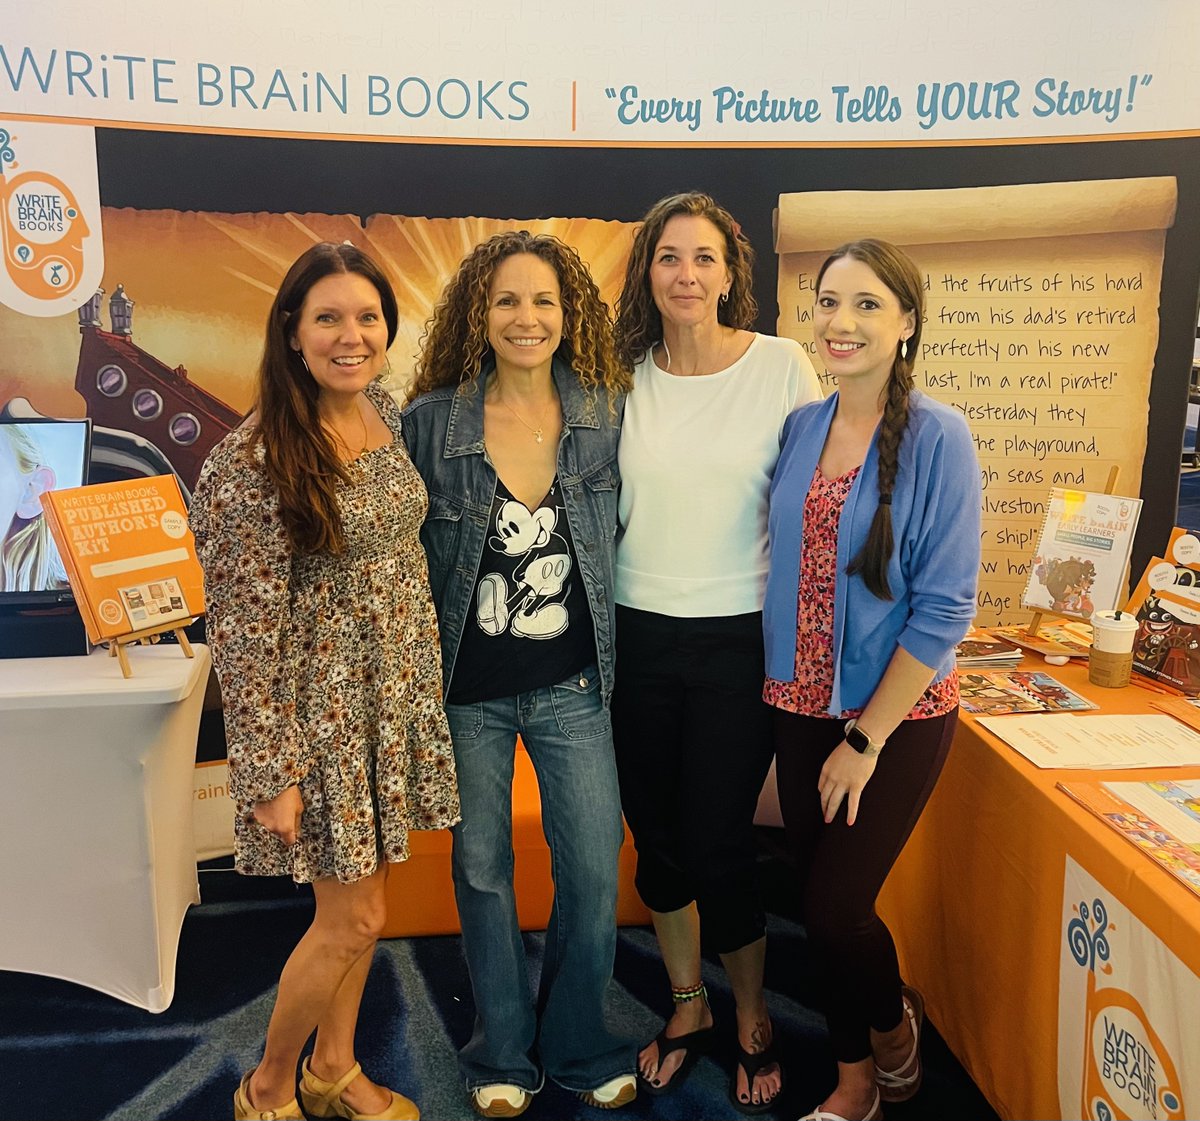 Calling all OSTi-CON 2023 Colleagues! We are EXCiTED to see you at our BRiGHT, ORANGE WRiTE BRAiN BOOTH this week in Corpus Christi, TX!! Come to our sessions on 5.31.23 @ 3:00pm & 6.1.23 @ 10:30am! SEE YOU THERE!